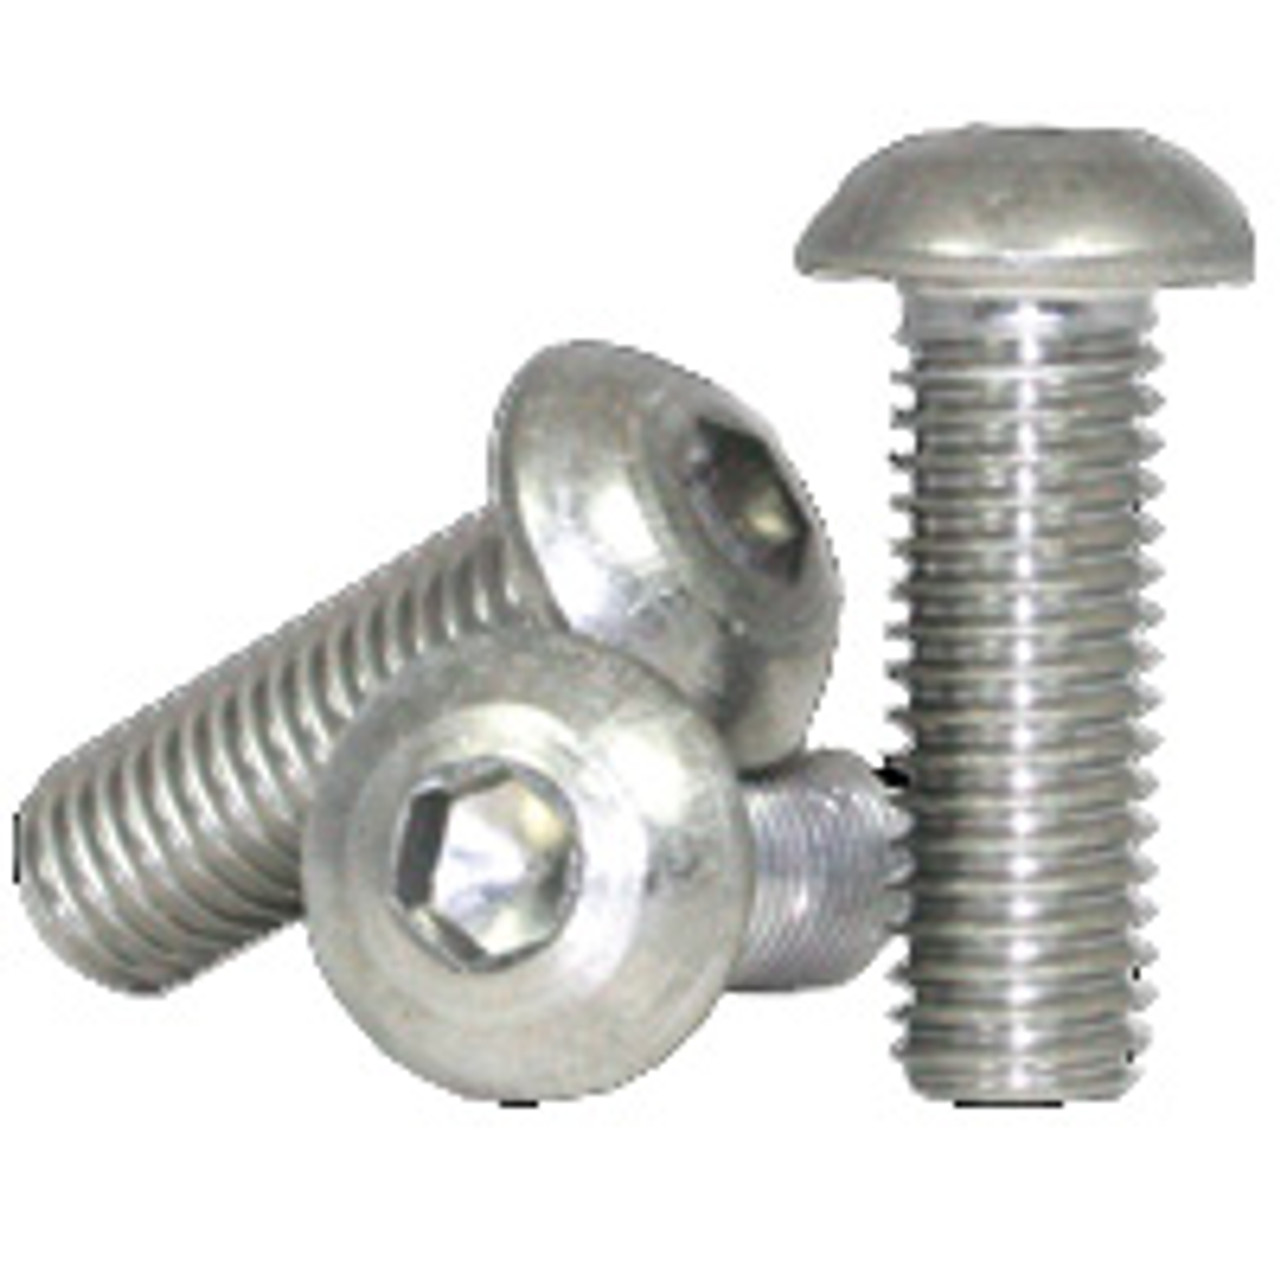 5/16"-18 x 7/8" Coarse Socket Button Hd Cap Screw Stainless 18-8 FT 